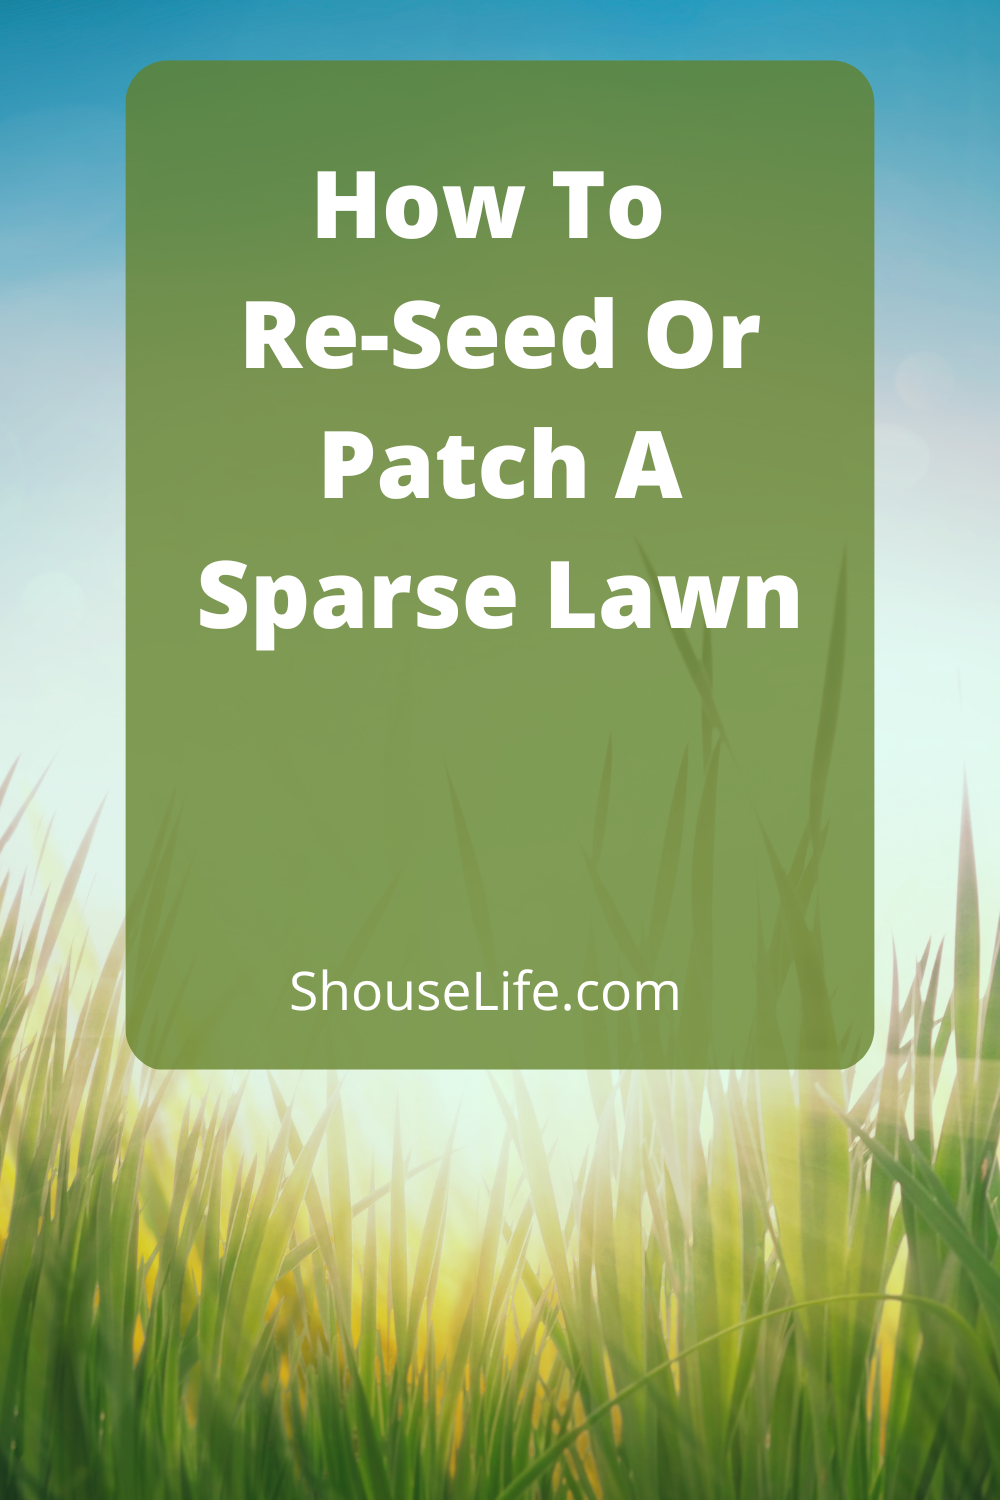 How To Re-Seed Or Patch A Sparse Lawn